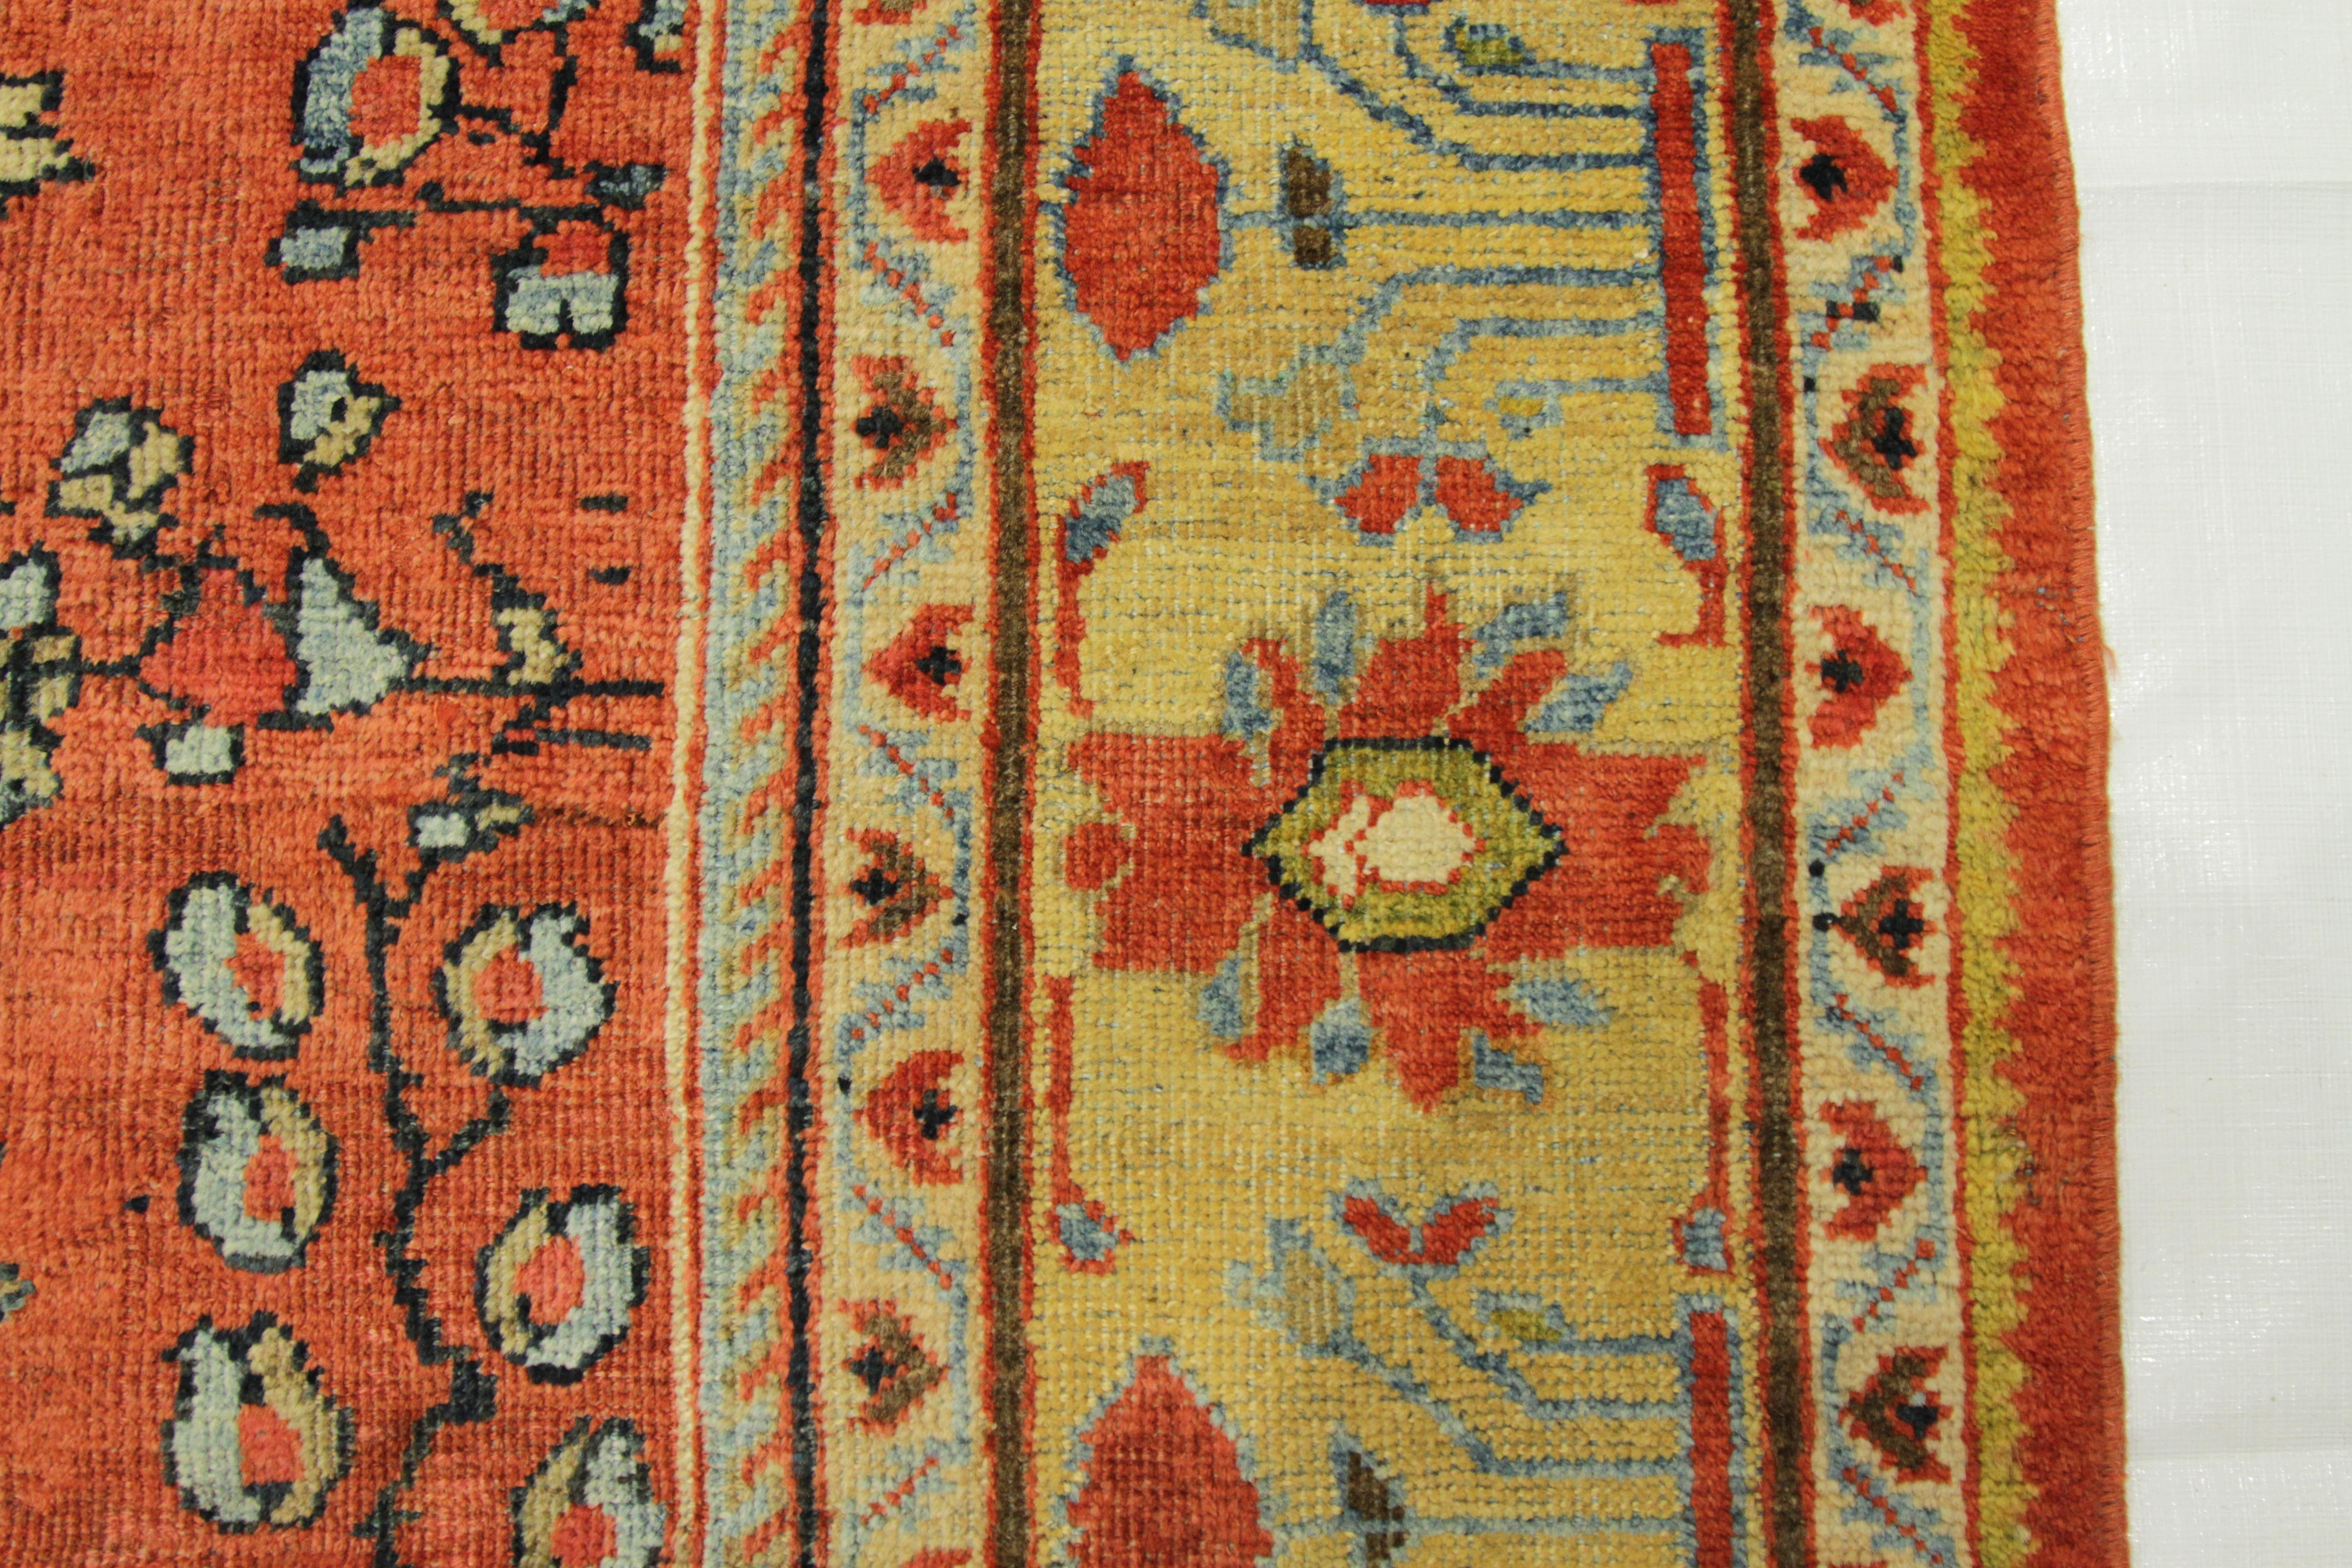 Wool 1920s Antique Mahal Persian Rug with Red and Yellow Floral Patterns For Sale